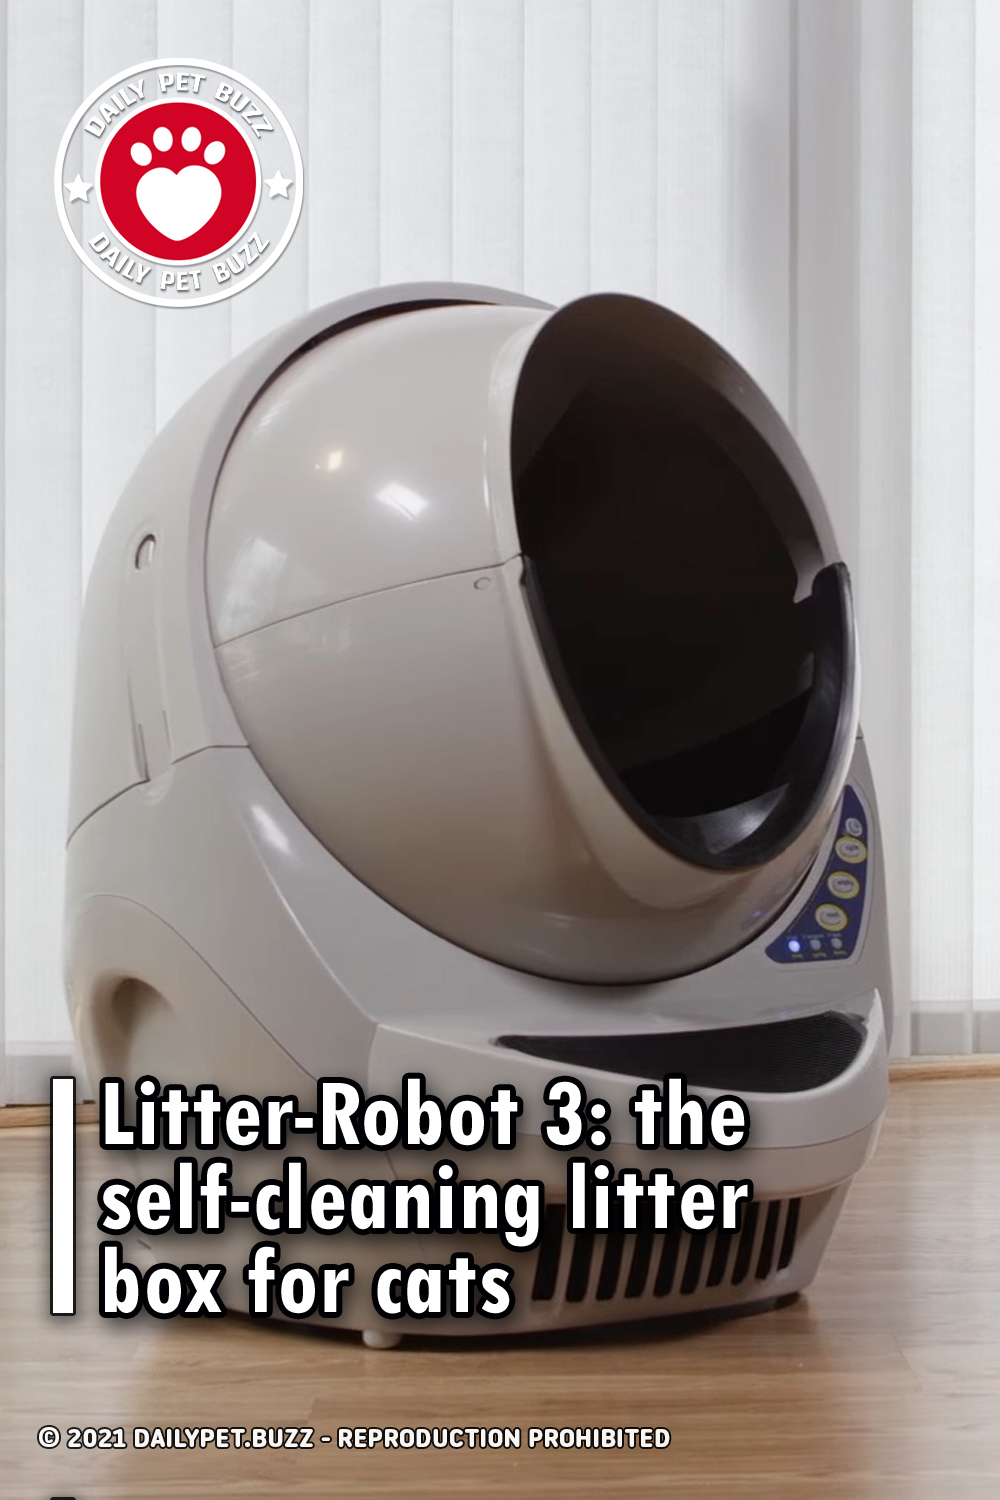 Litter-Robot 3: the self-cleaning litter box for cats